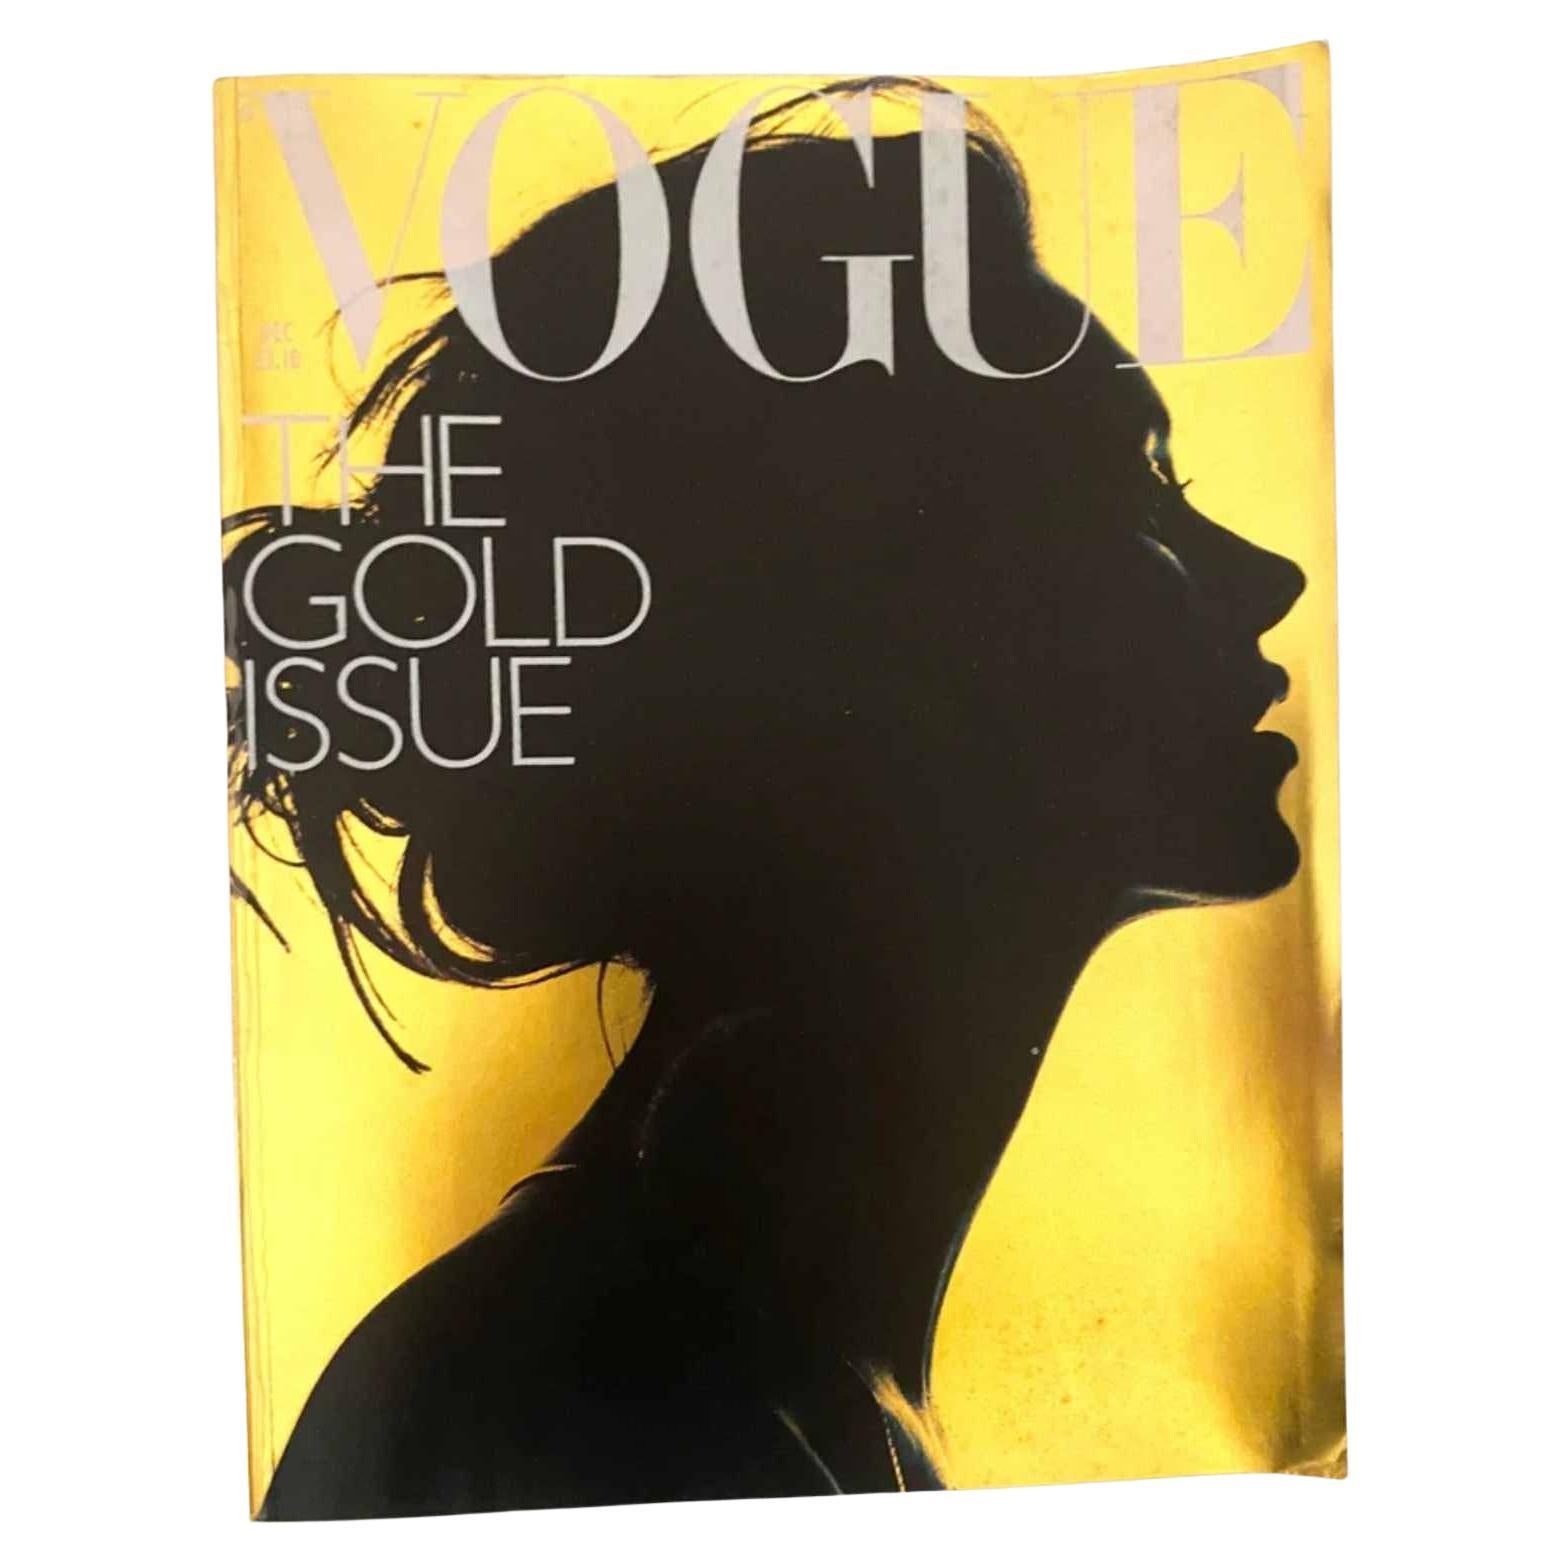 2000 Vogue - The Golden Issue - Cover by Nick Knight